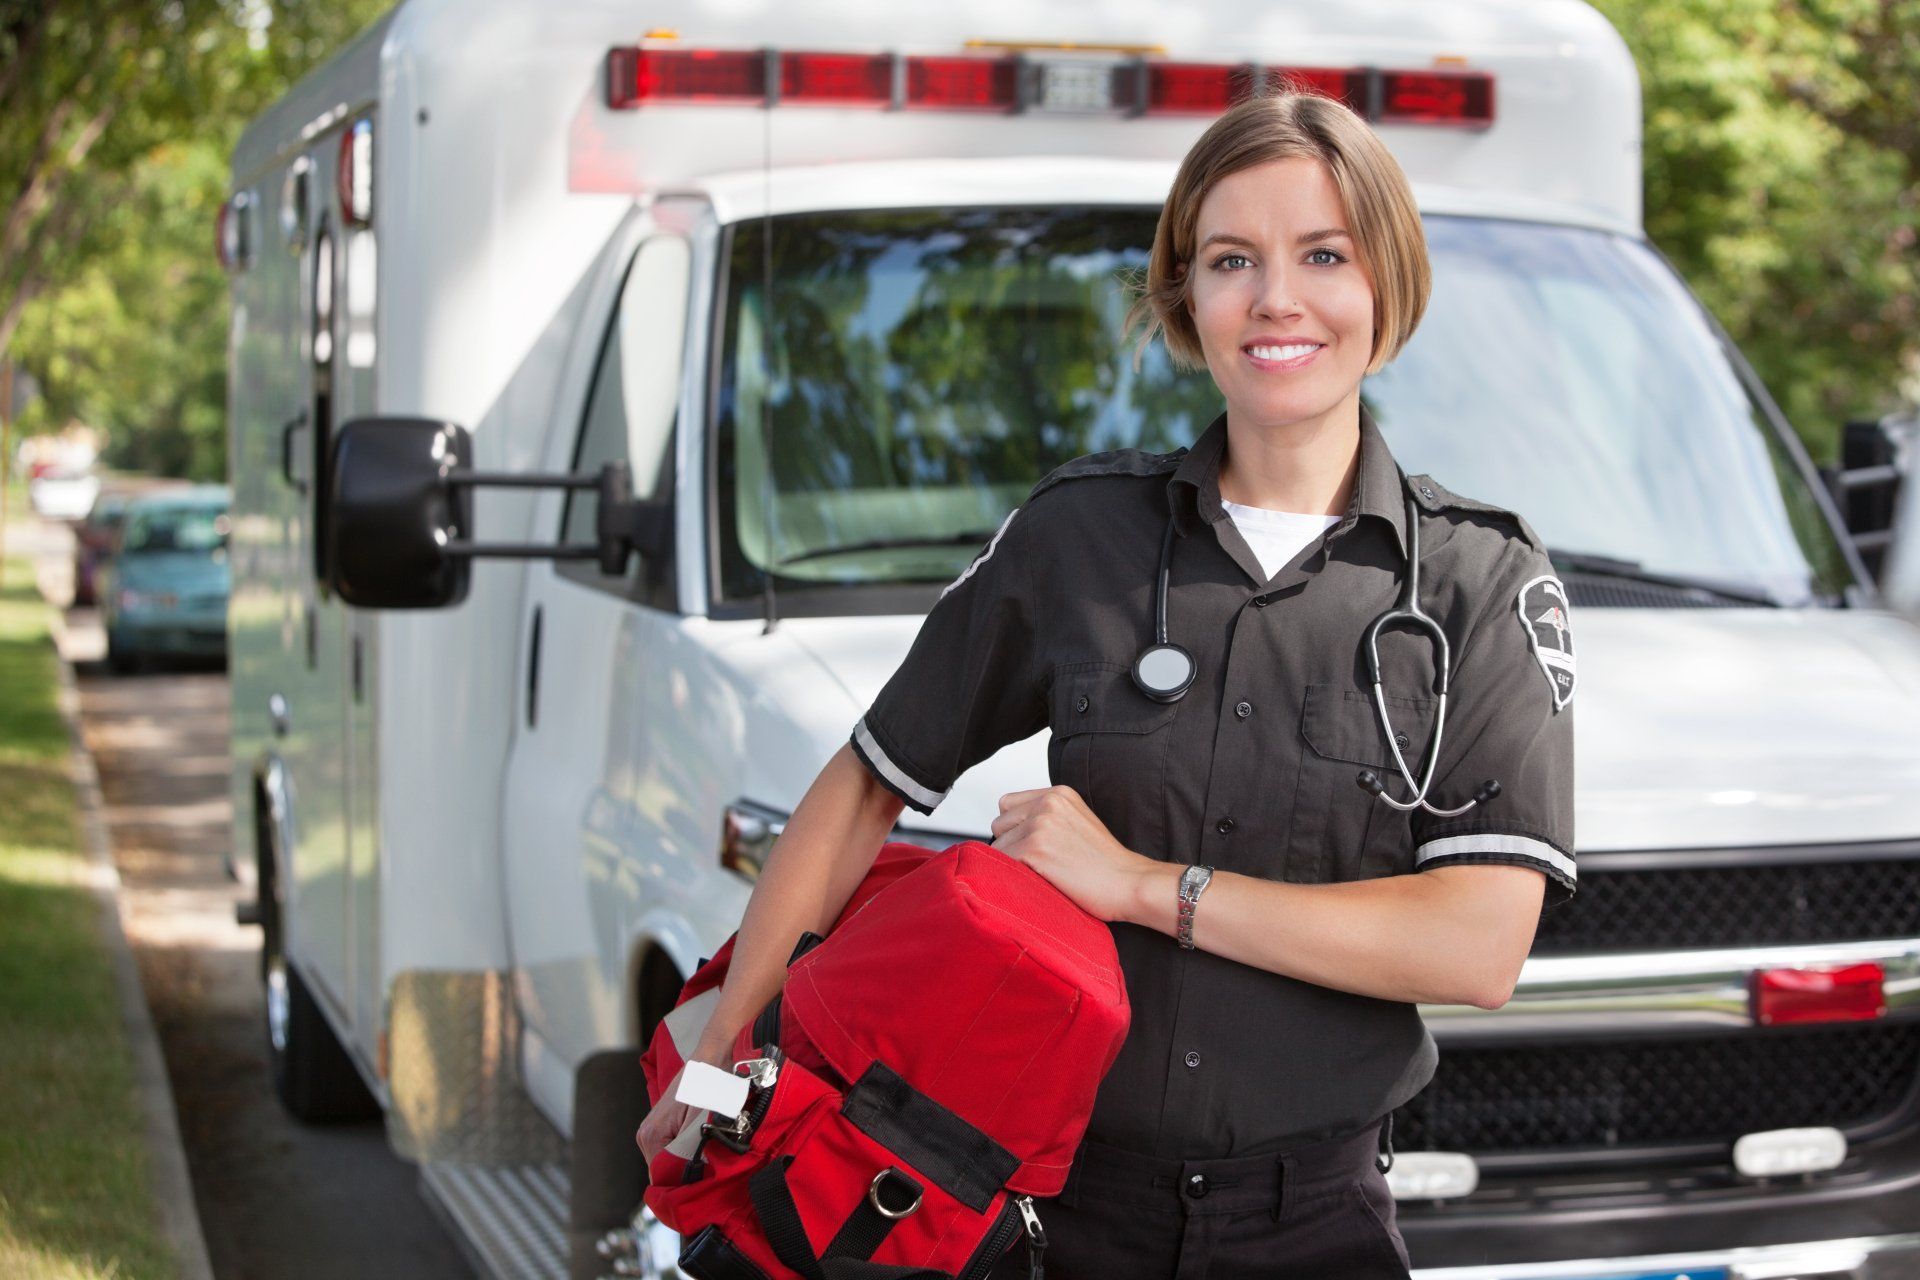 A female paramedic is standing in front of an ambulance holding a bag.